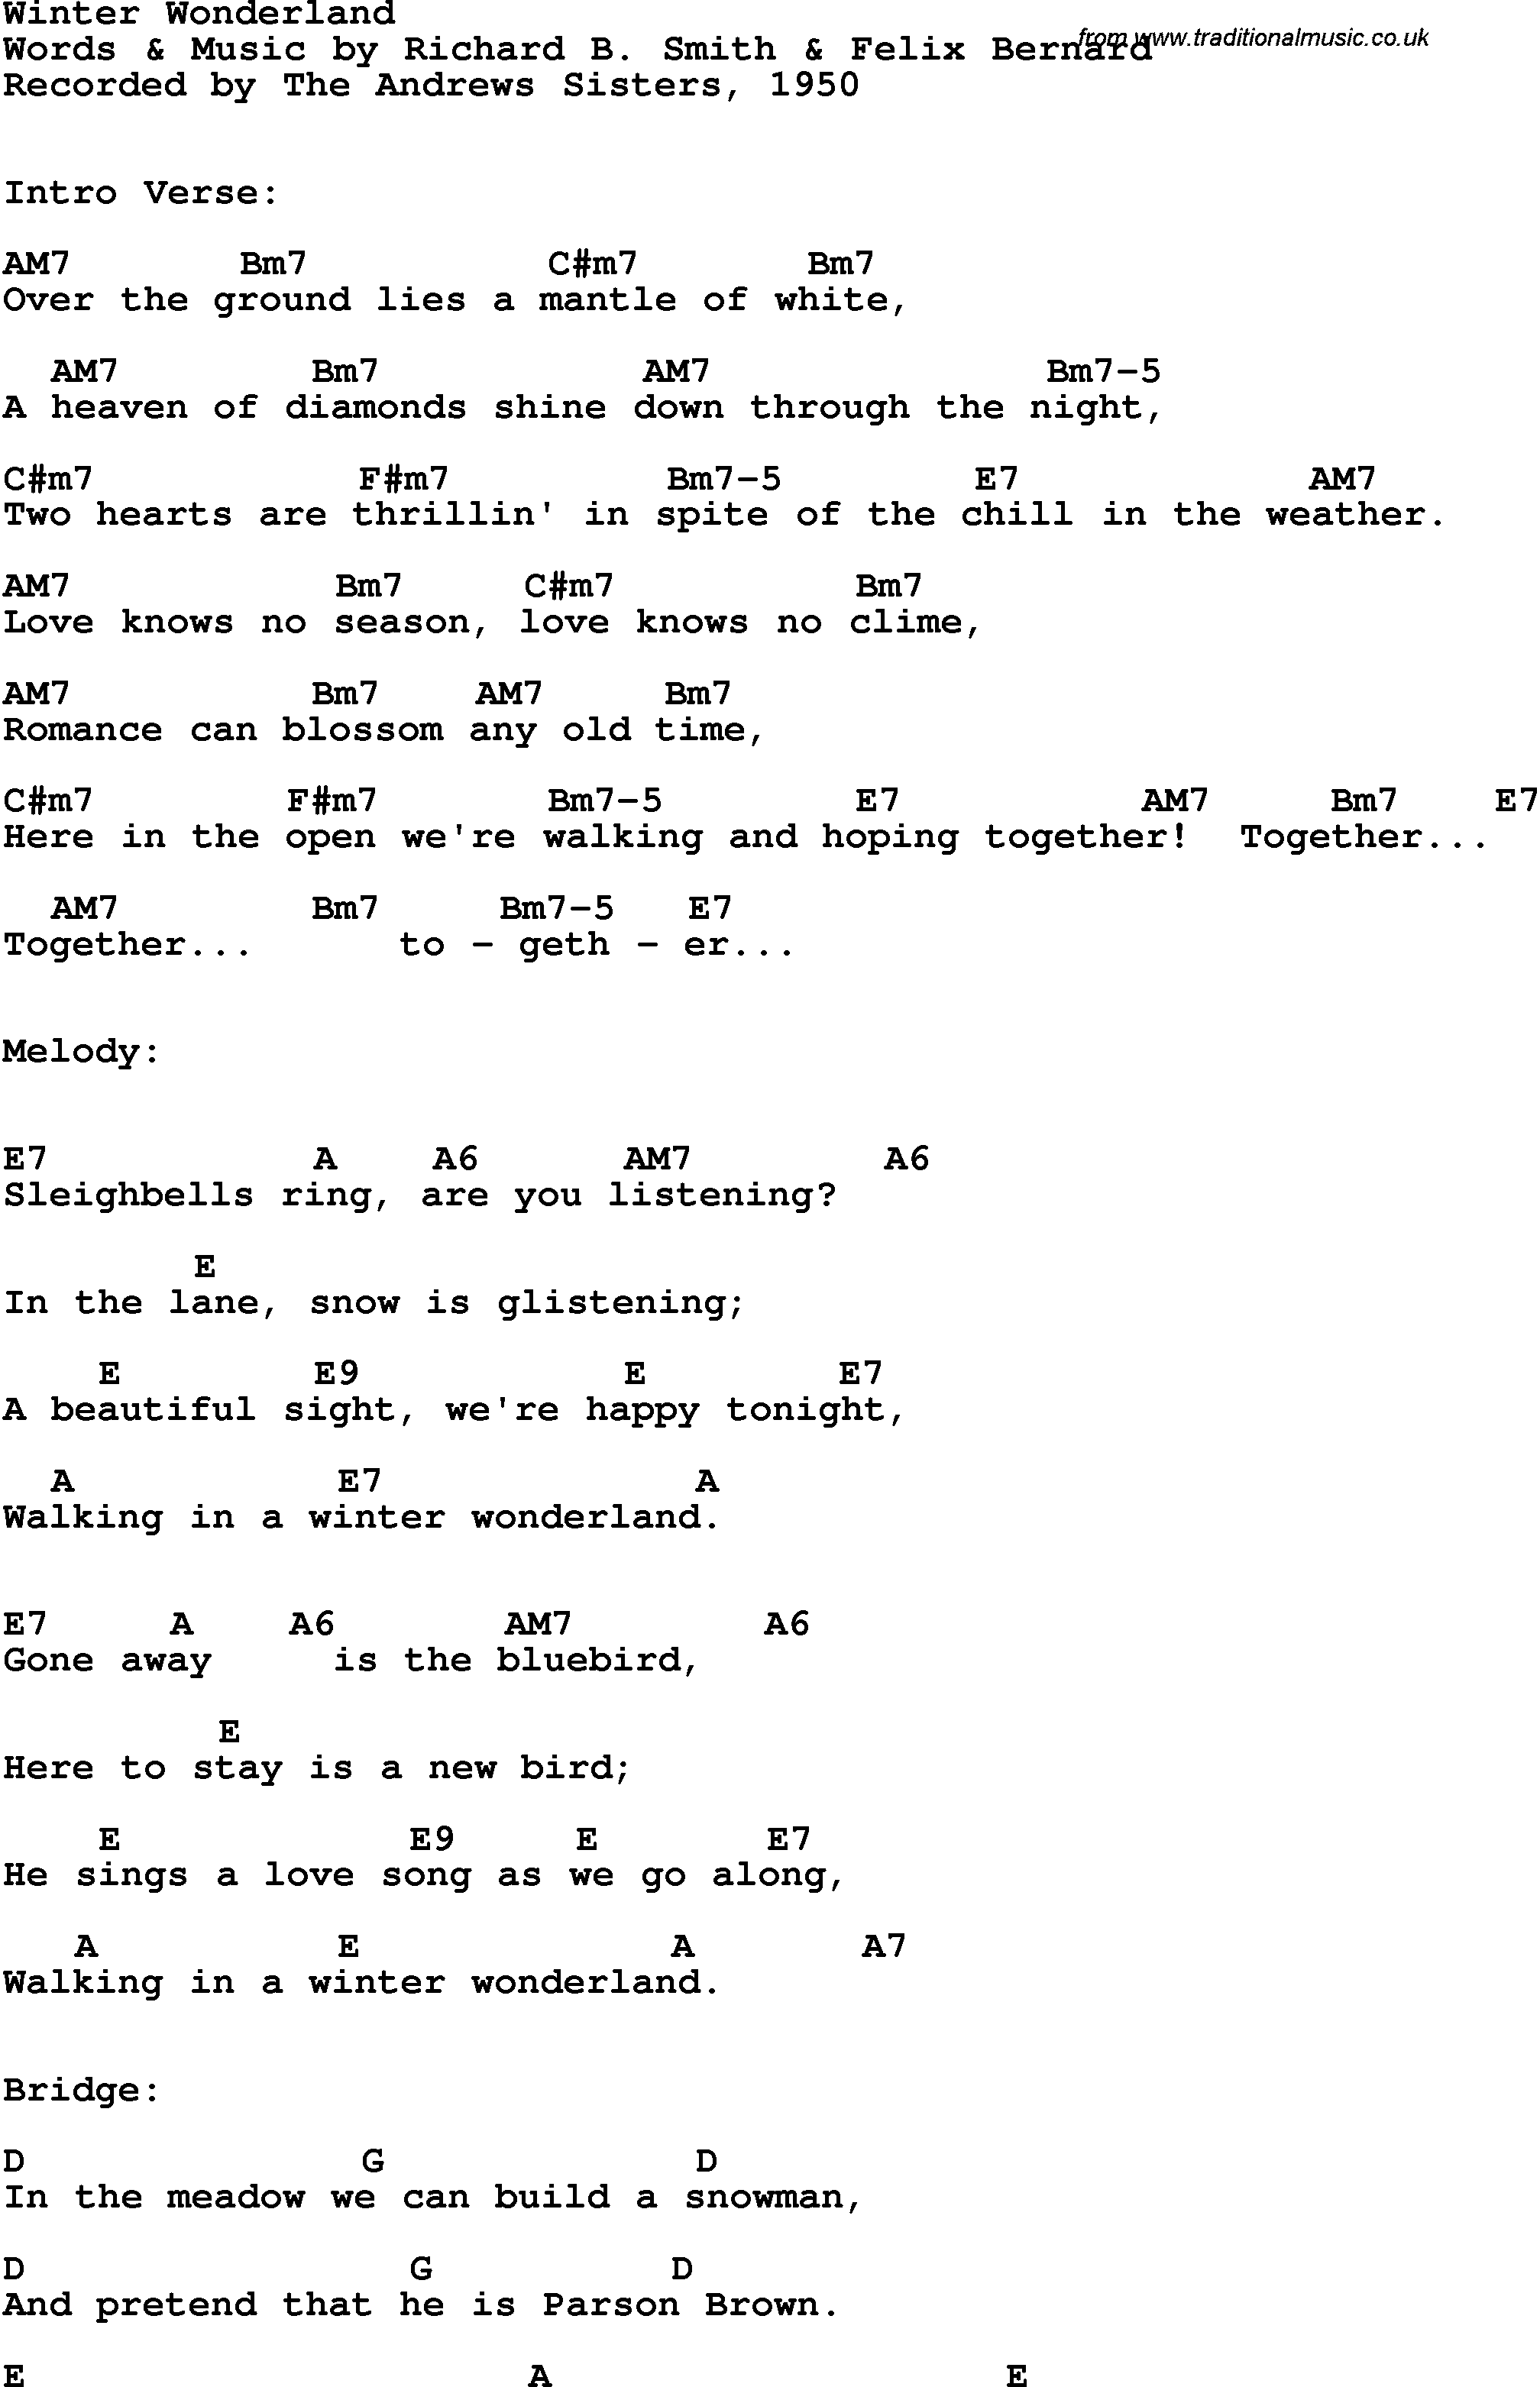 Song Lyrics with guitar chords for Winter Wonderland - The Andrews Sisters, 1950